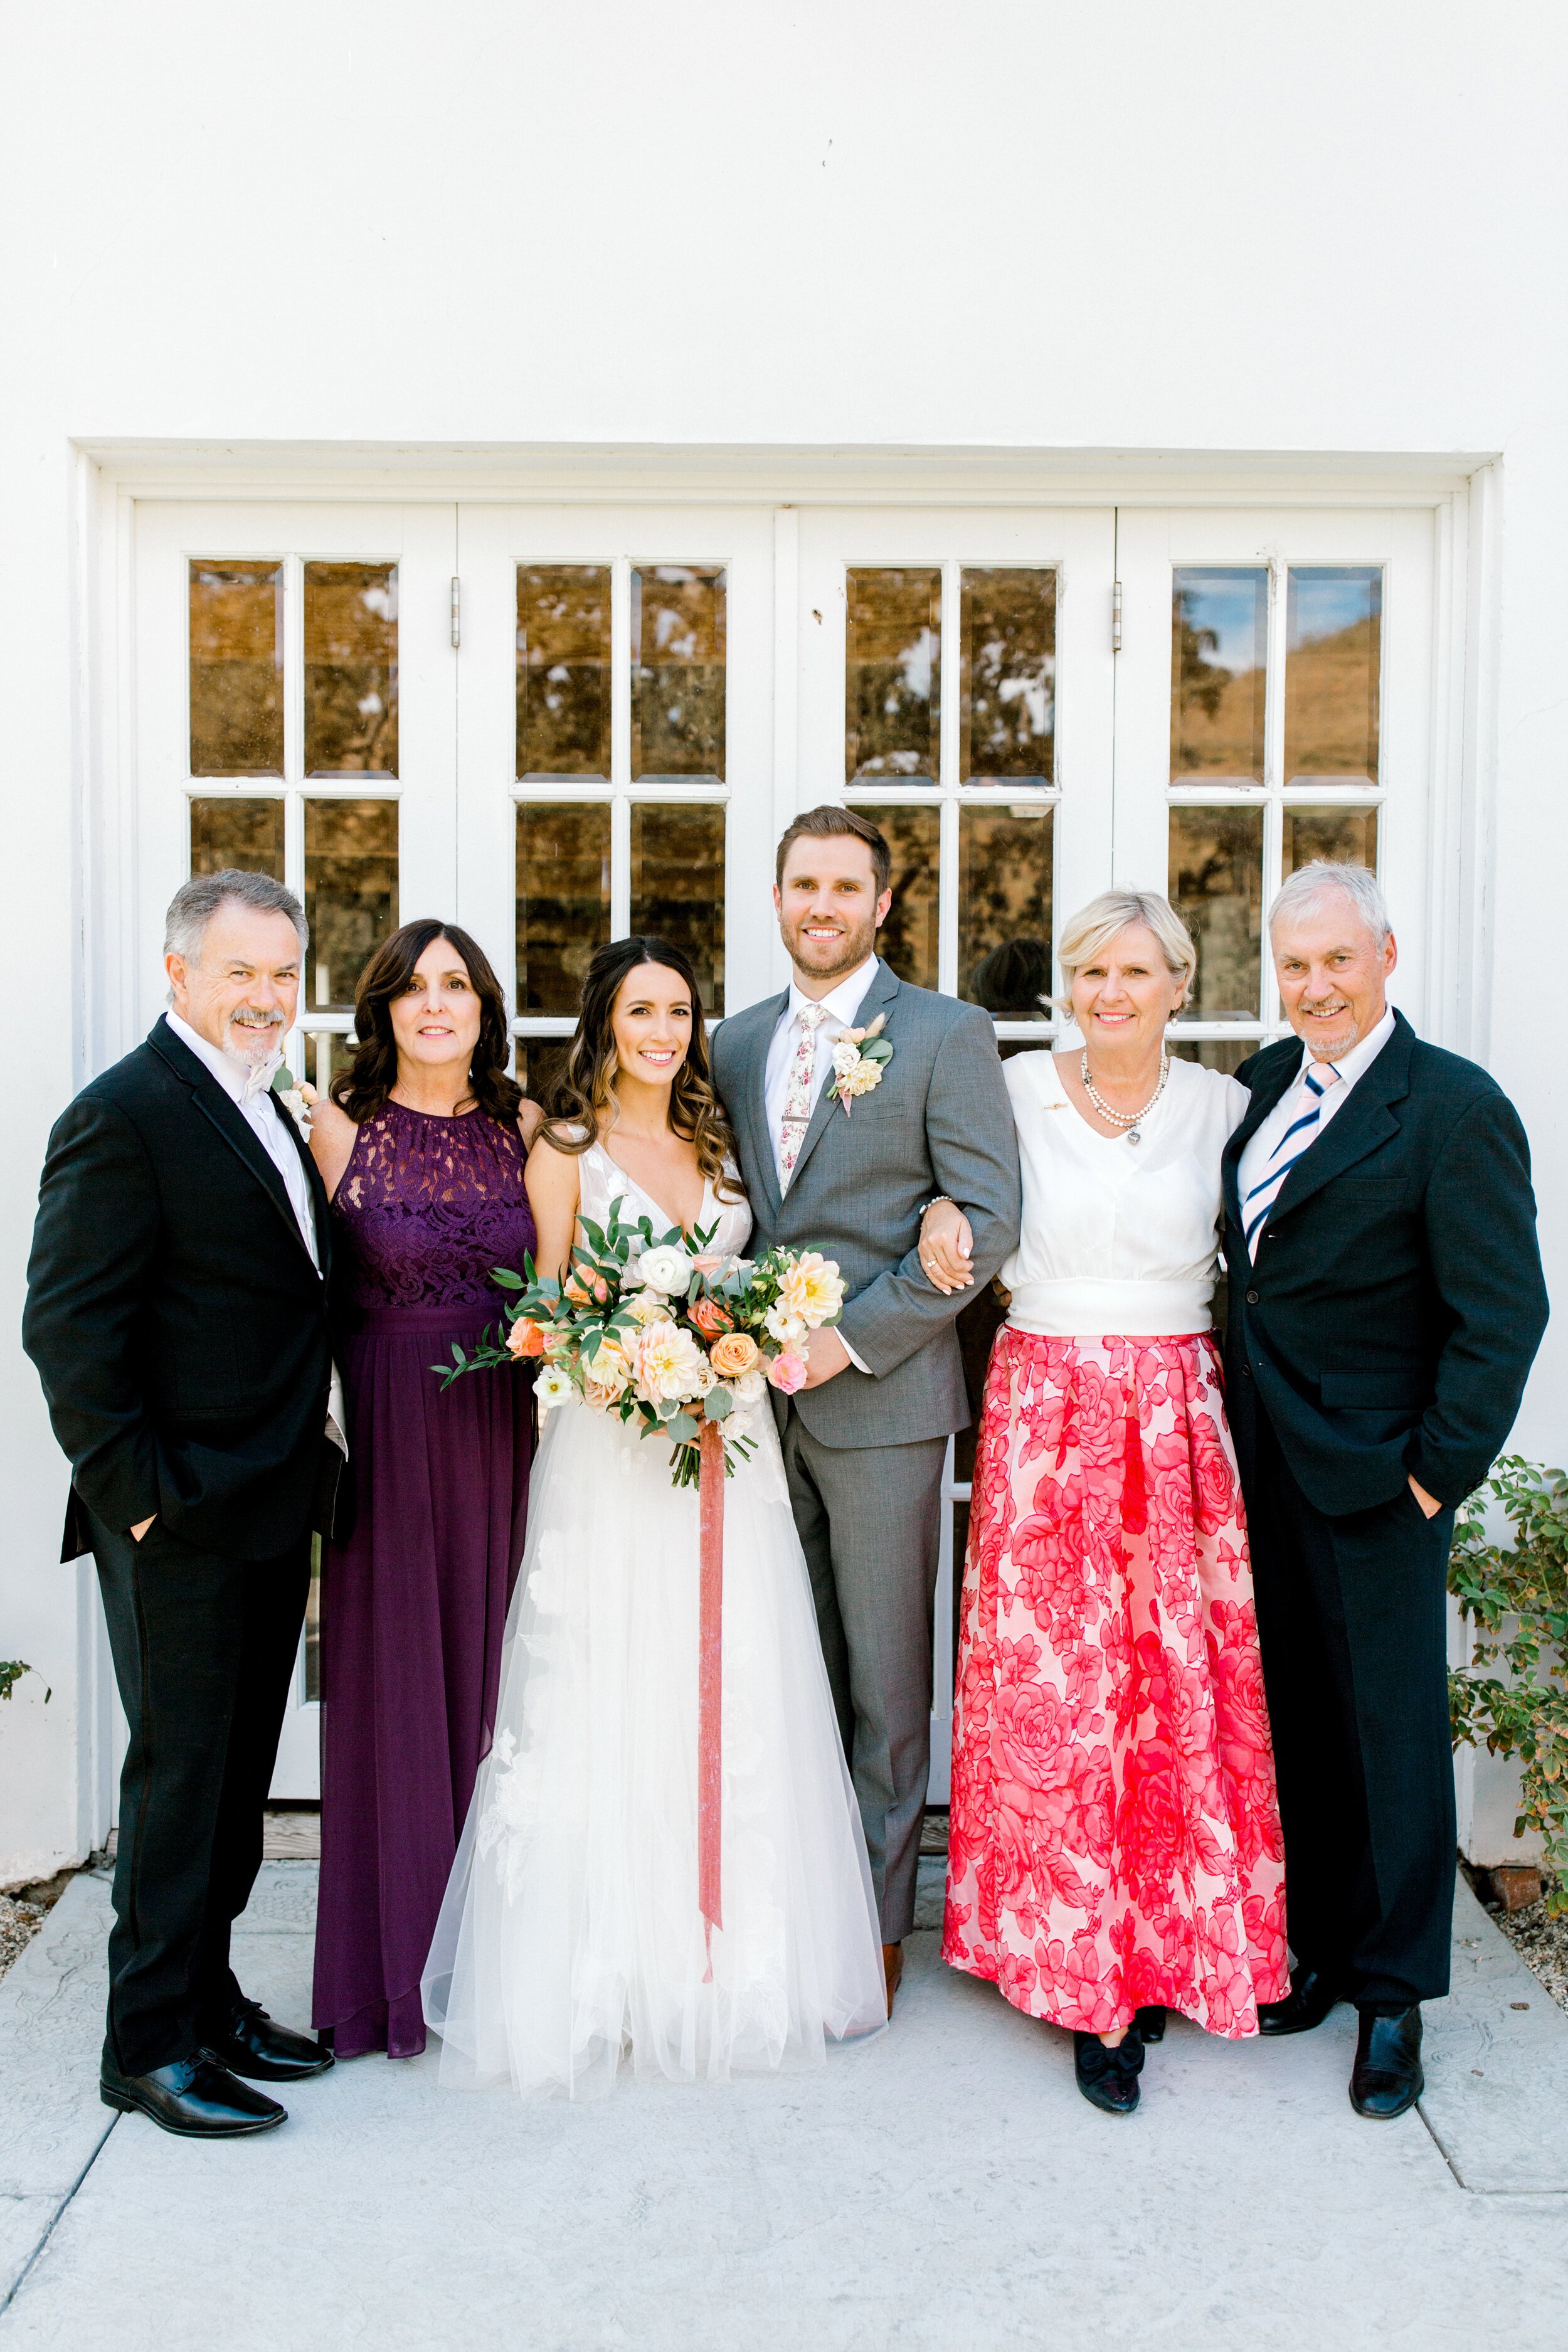 www.santabarbarawedding.com | Events by Fran | Brooke Borough Photography | Triunfo Creek Vineyards | Velvet Blooms | Lili Bridals | Blushing Beauty | Bride and Groom with Parents